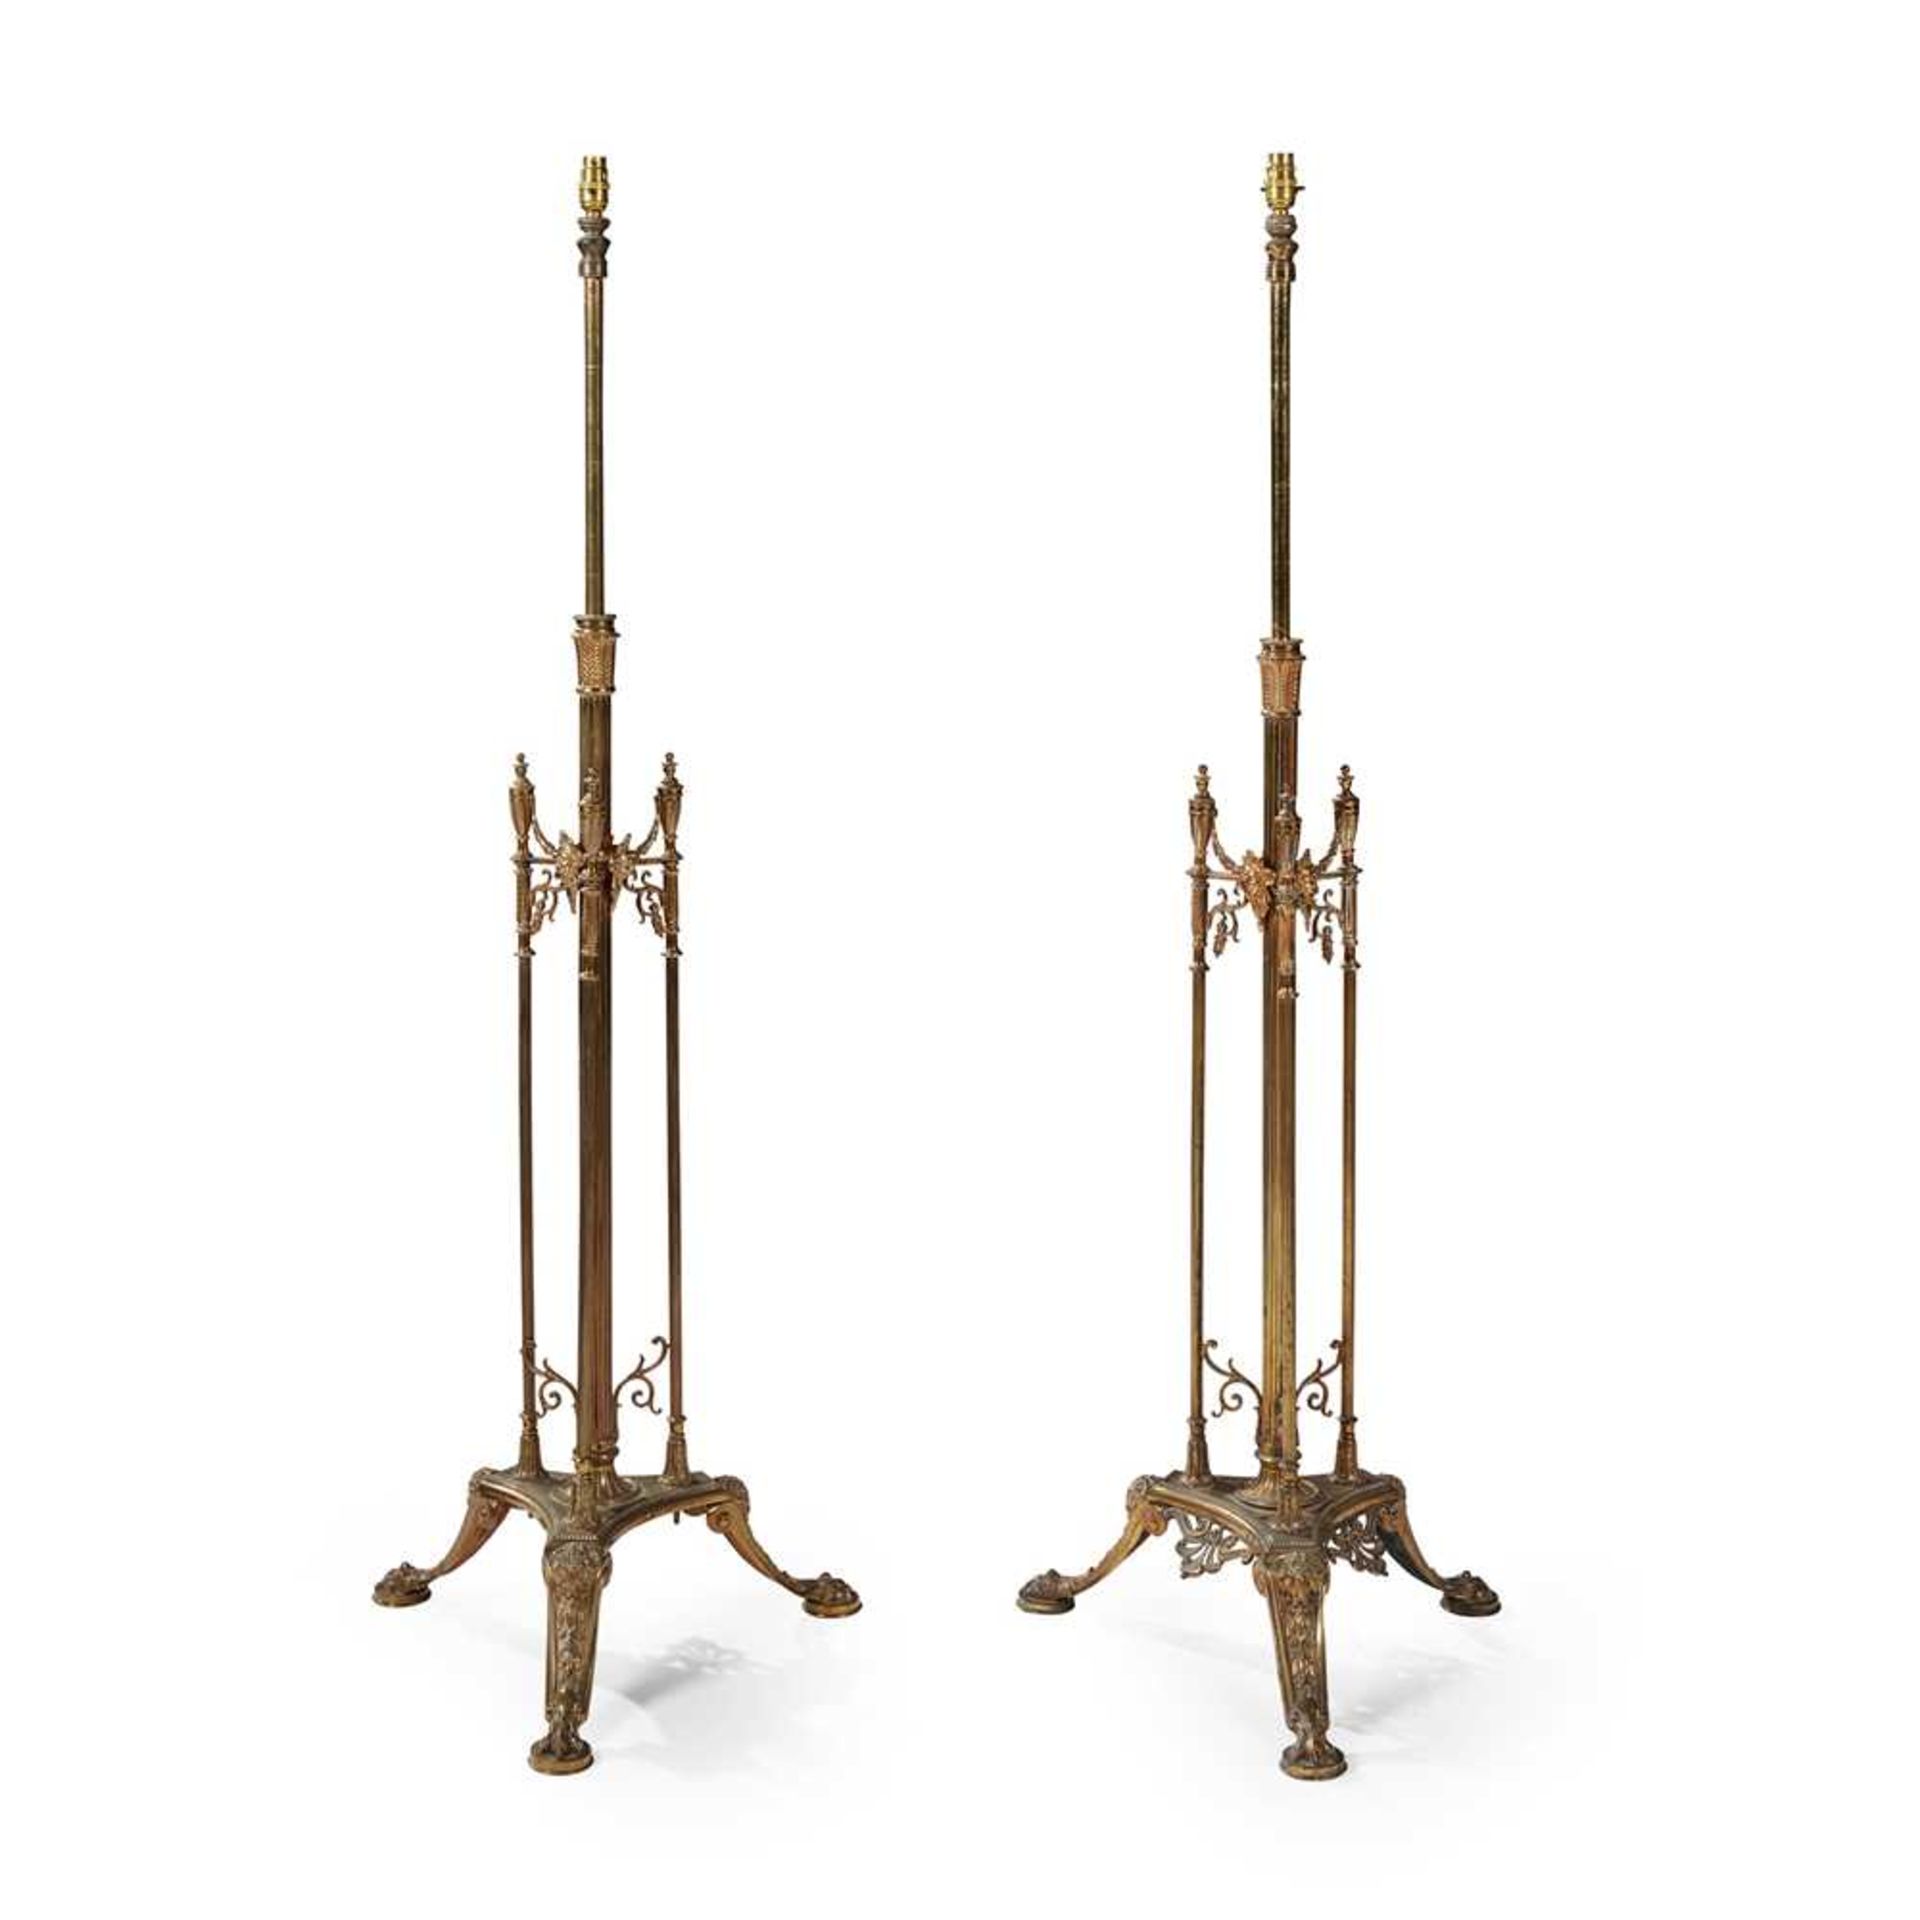 PAIR OF TELESCOPIC BRASS STANDARD LAMPS LATE 19TH CENTURY